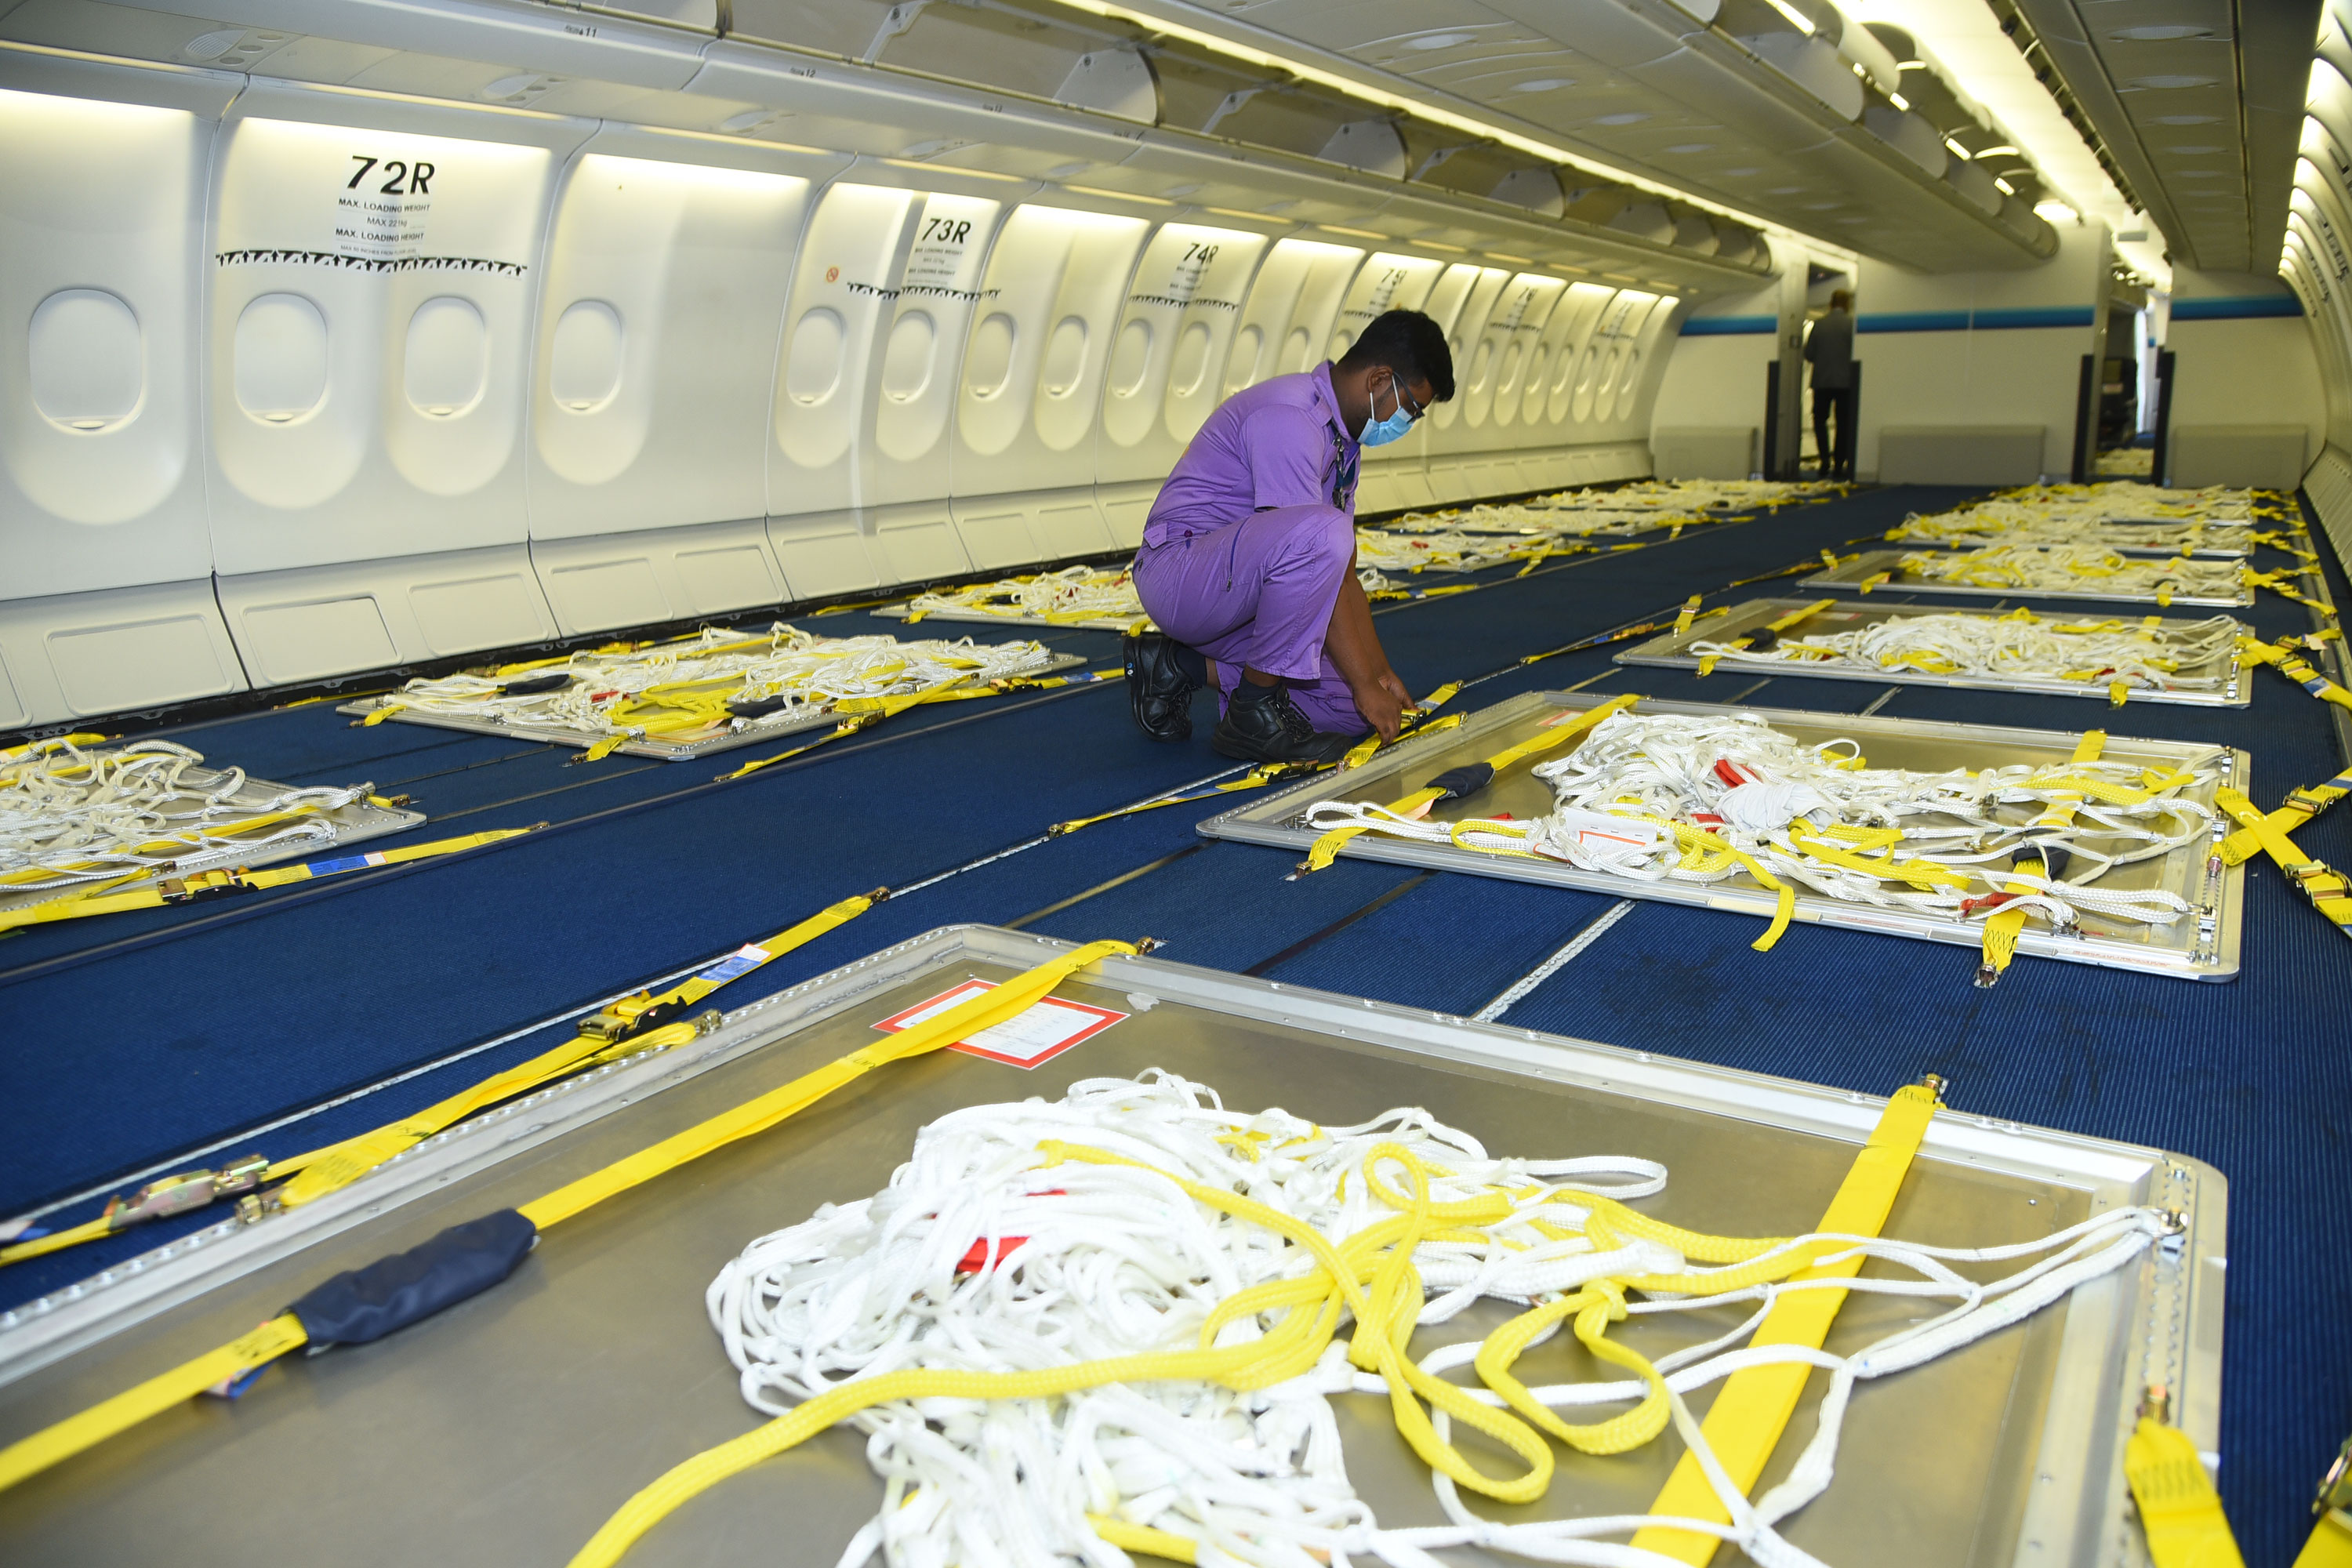 A SriLankan Airlines Engineering Technician fixing cargo pallets